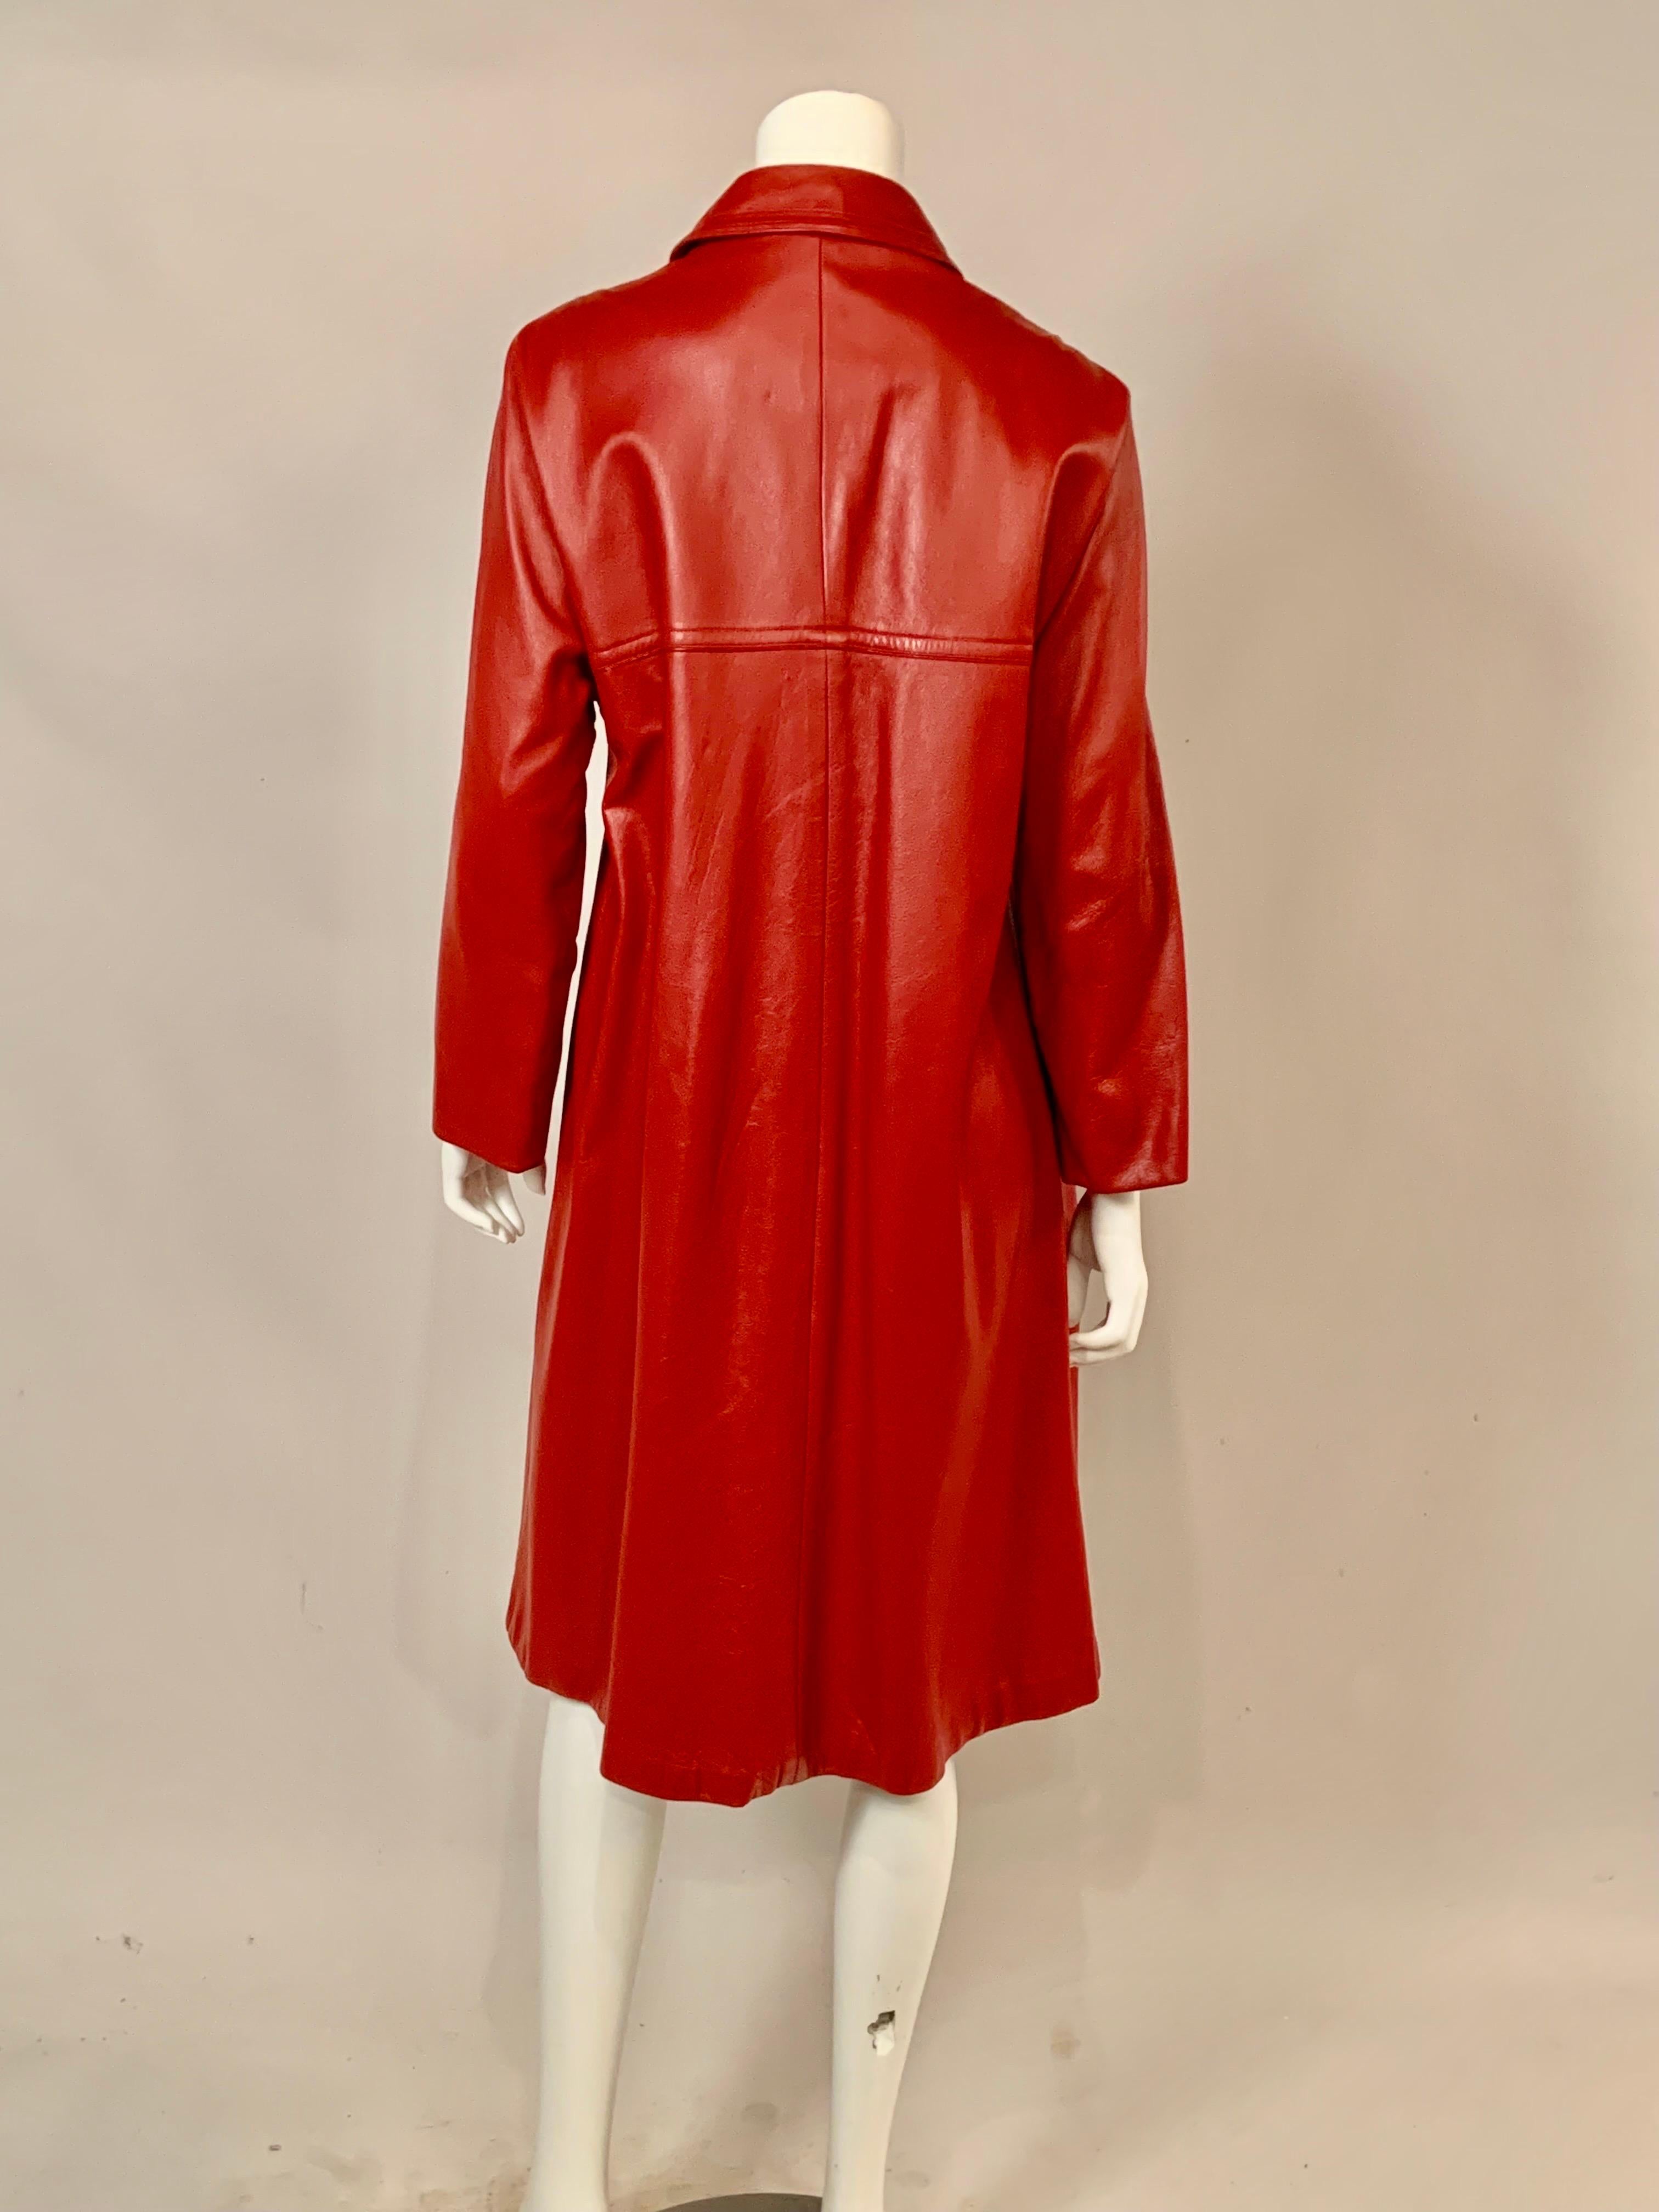 Bonnie Cashin for Sills Red Leather Coat with Brass Toggle Closures For Sale 5